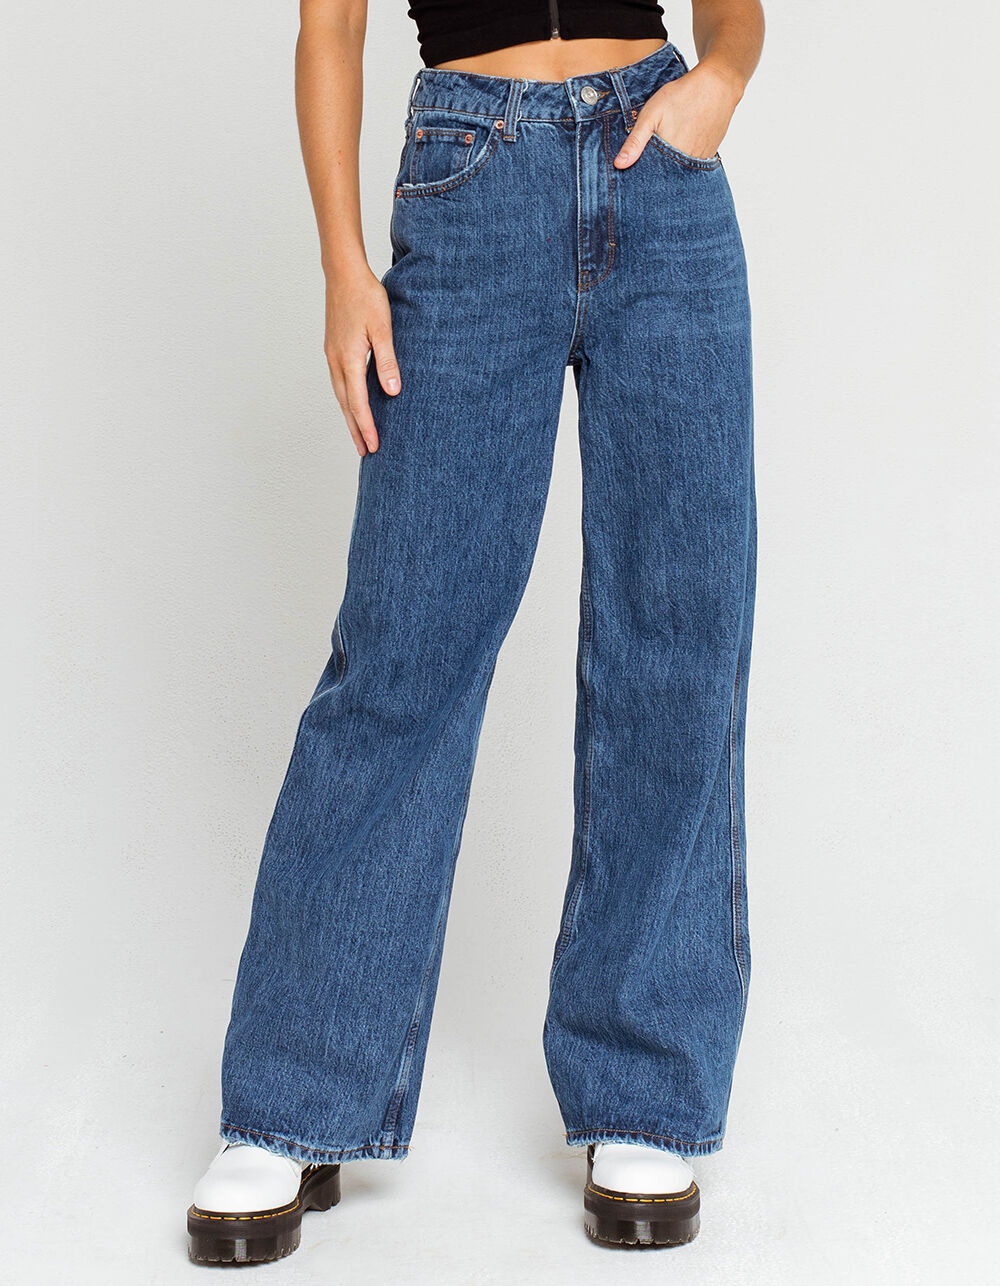 BDG Urban Outfitters Puddle Womens Jeans - MEDIUM WASH | Tillys